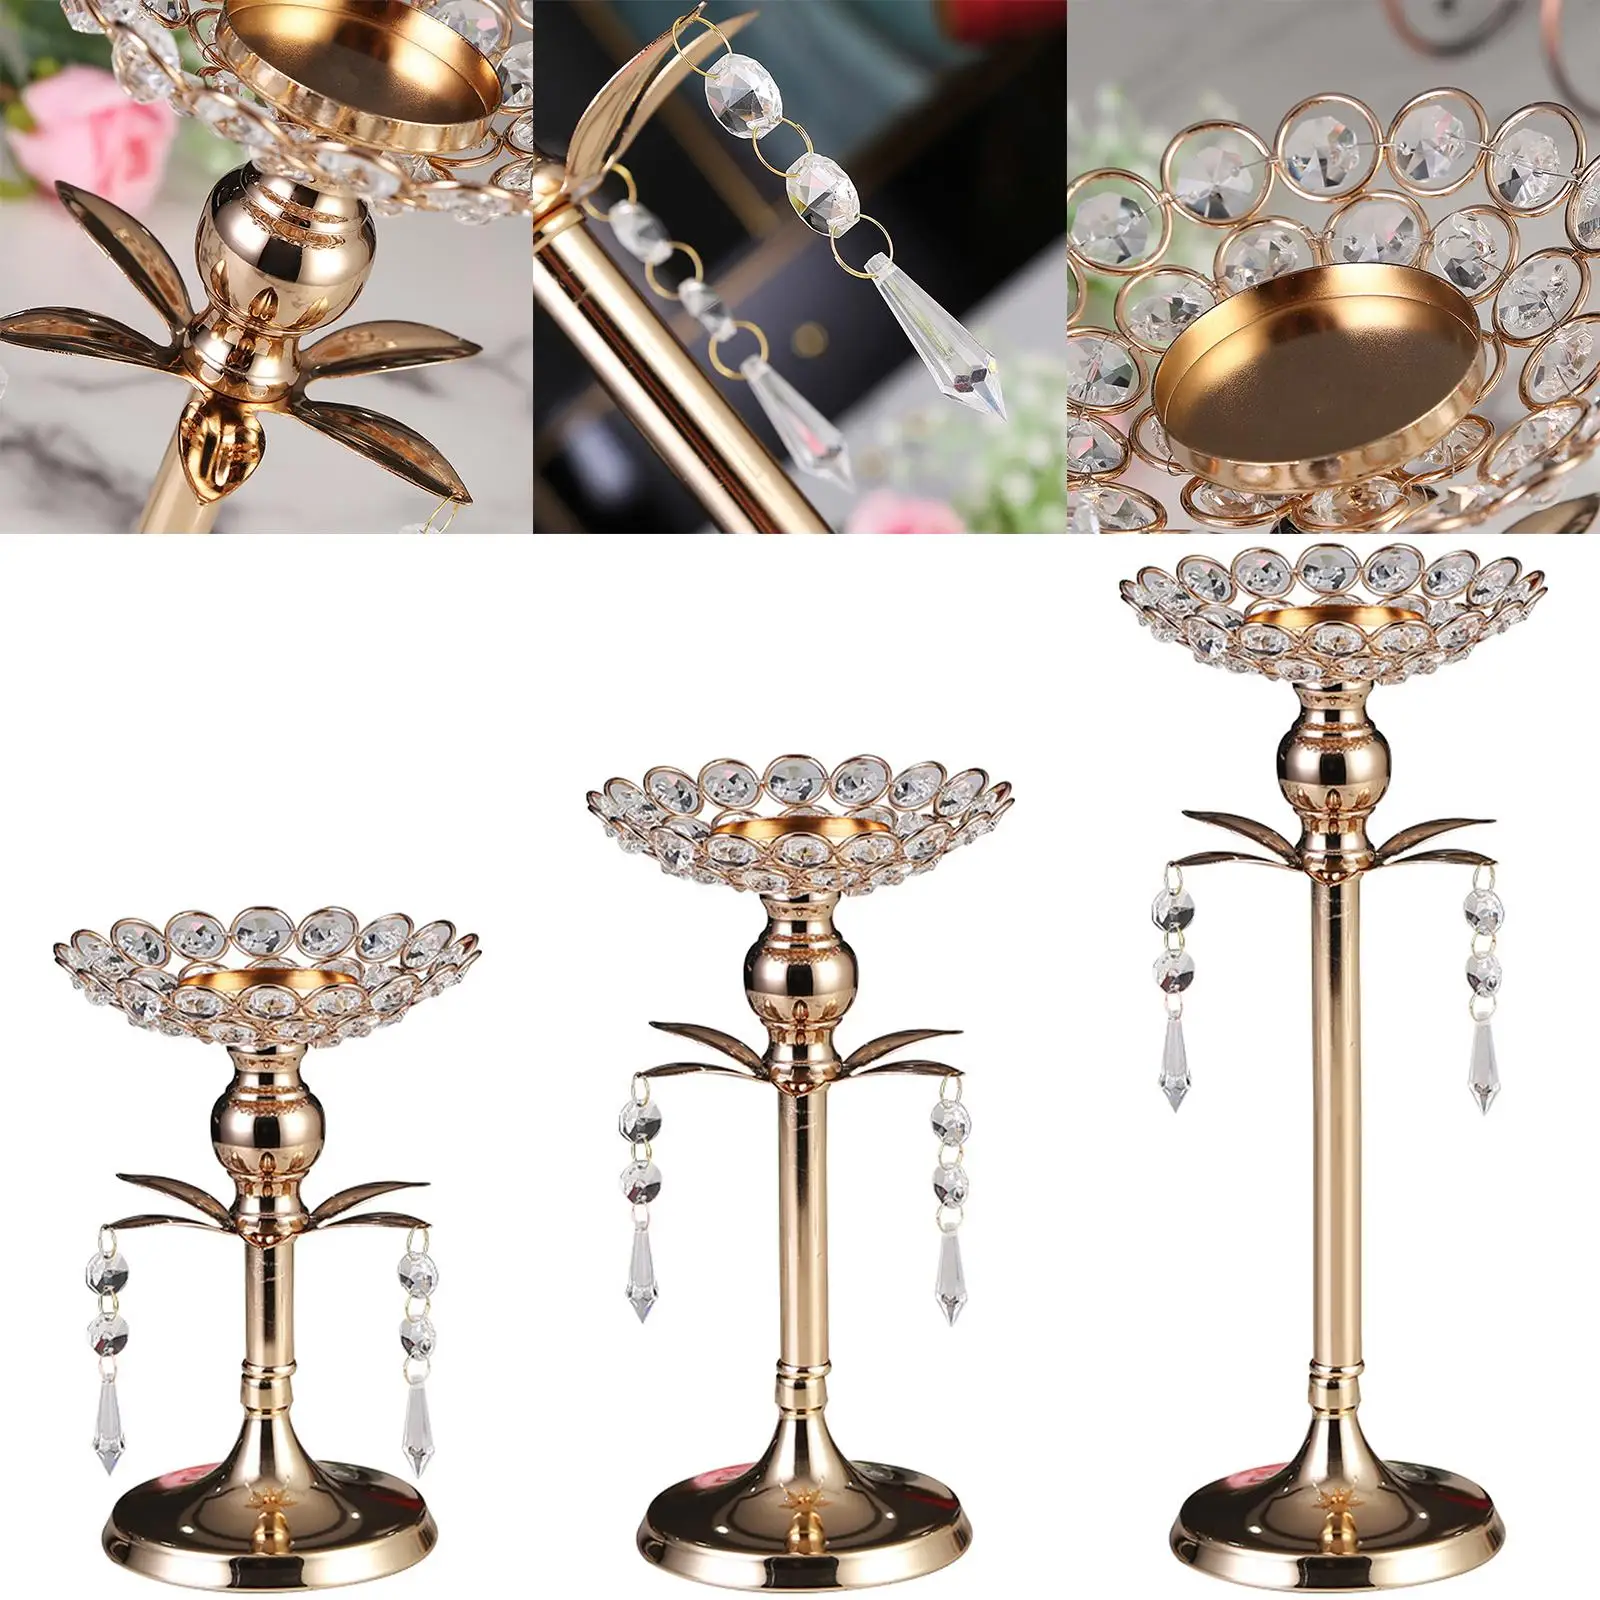 Golden Crystal Candle Holder Table Centerpiece Wedding Candlestick for Dinner Wedding Living Anniversary Housewarming Gifts